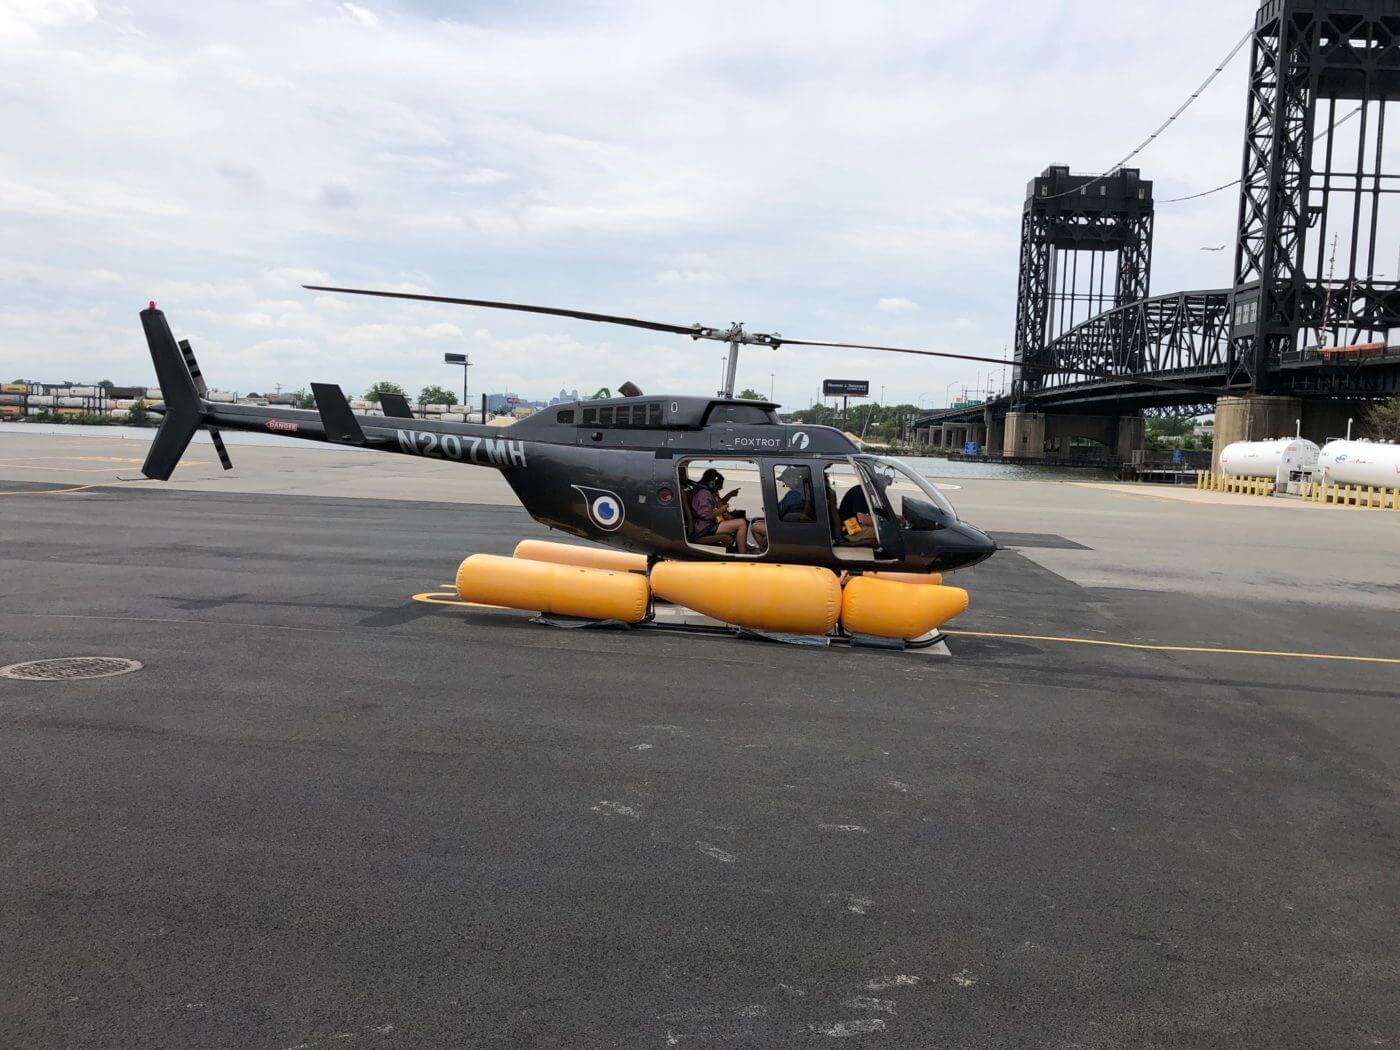 FlyNYON confirmed that one of its new LongRanger pilots inadvertently activated the emergency floats during a passenger-carrying flight earlier this summer.